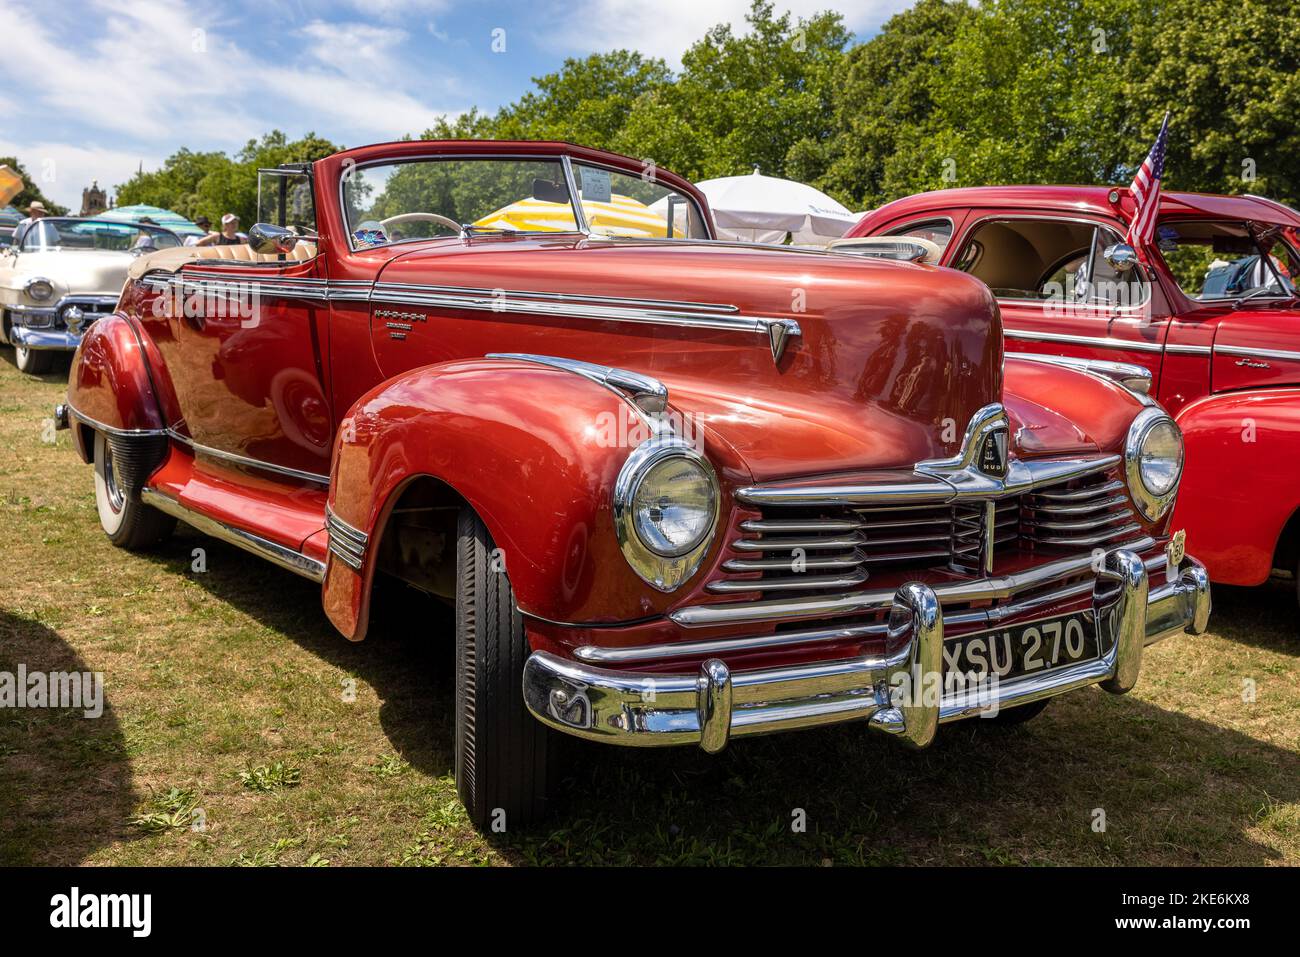 1947 Hudson Commodore ‘XSU 270’ on display at the American Auto Club Rally of the Giants, held at Blenheim Palace on the 10th July 2022 Stock Photo